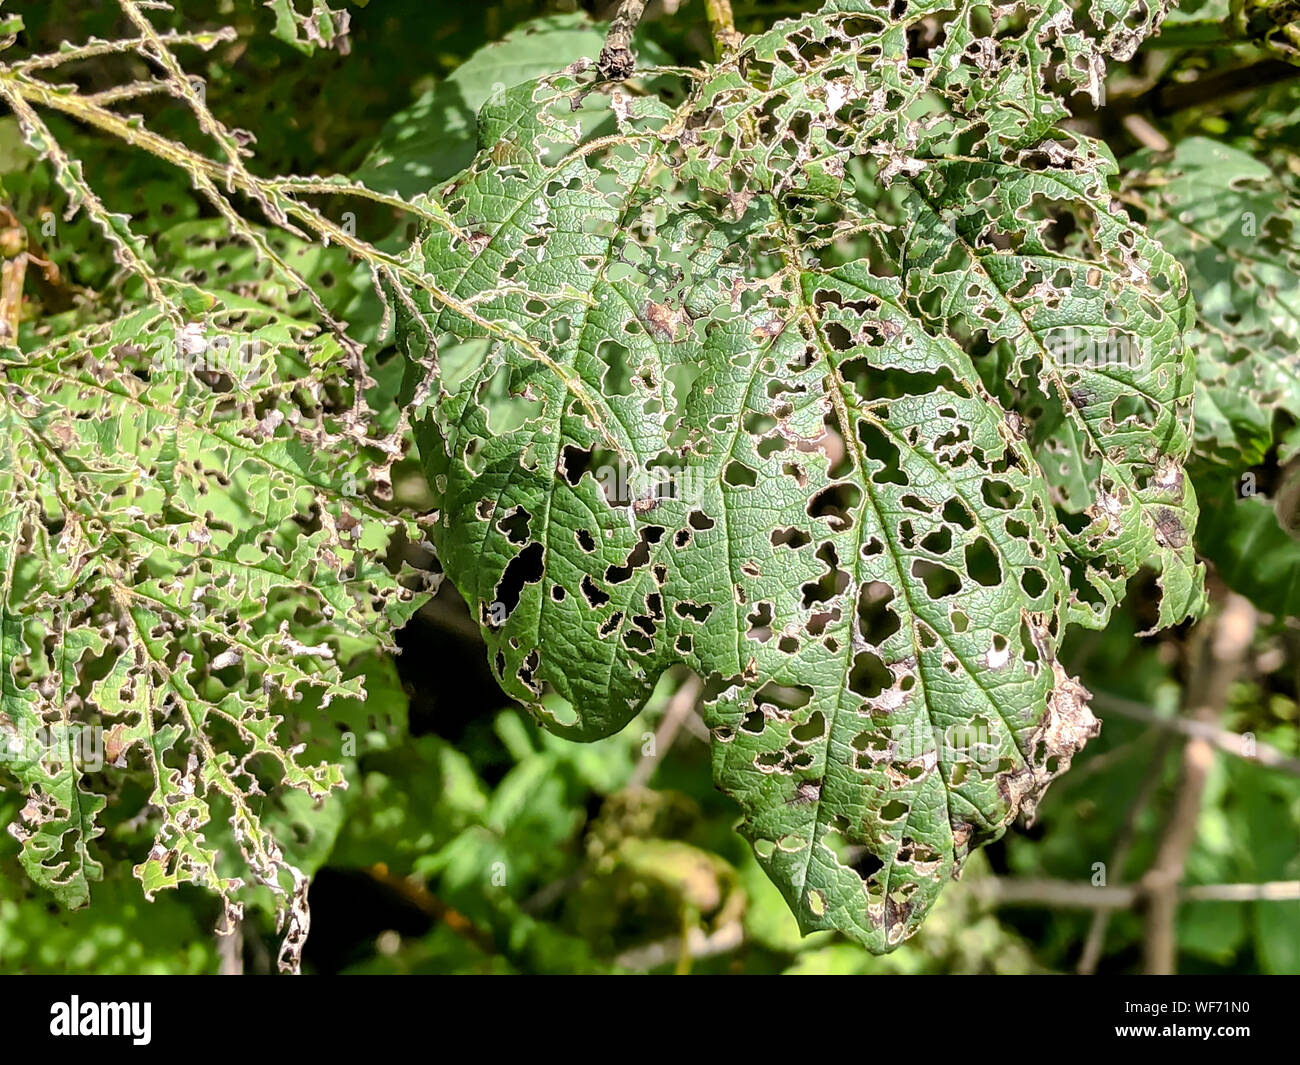 green leaf affected or damaged by insect pests. closeup view Stock Photo